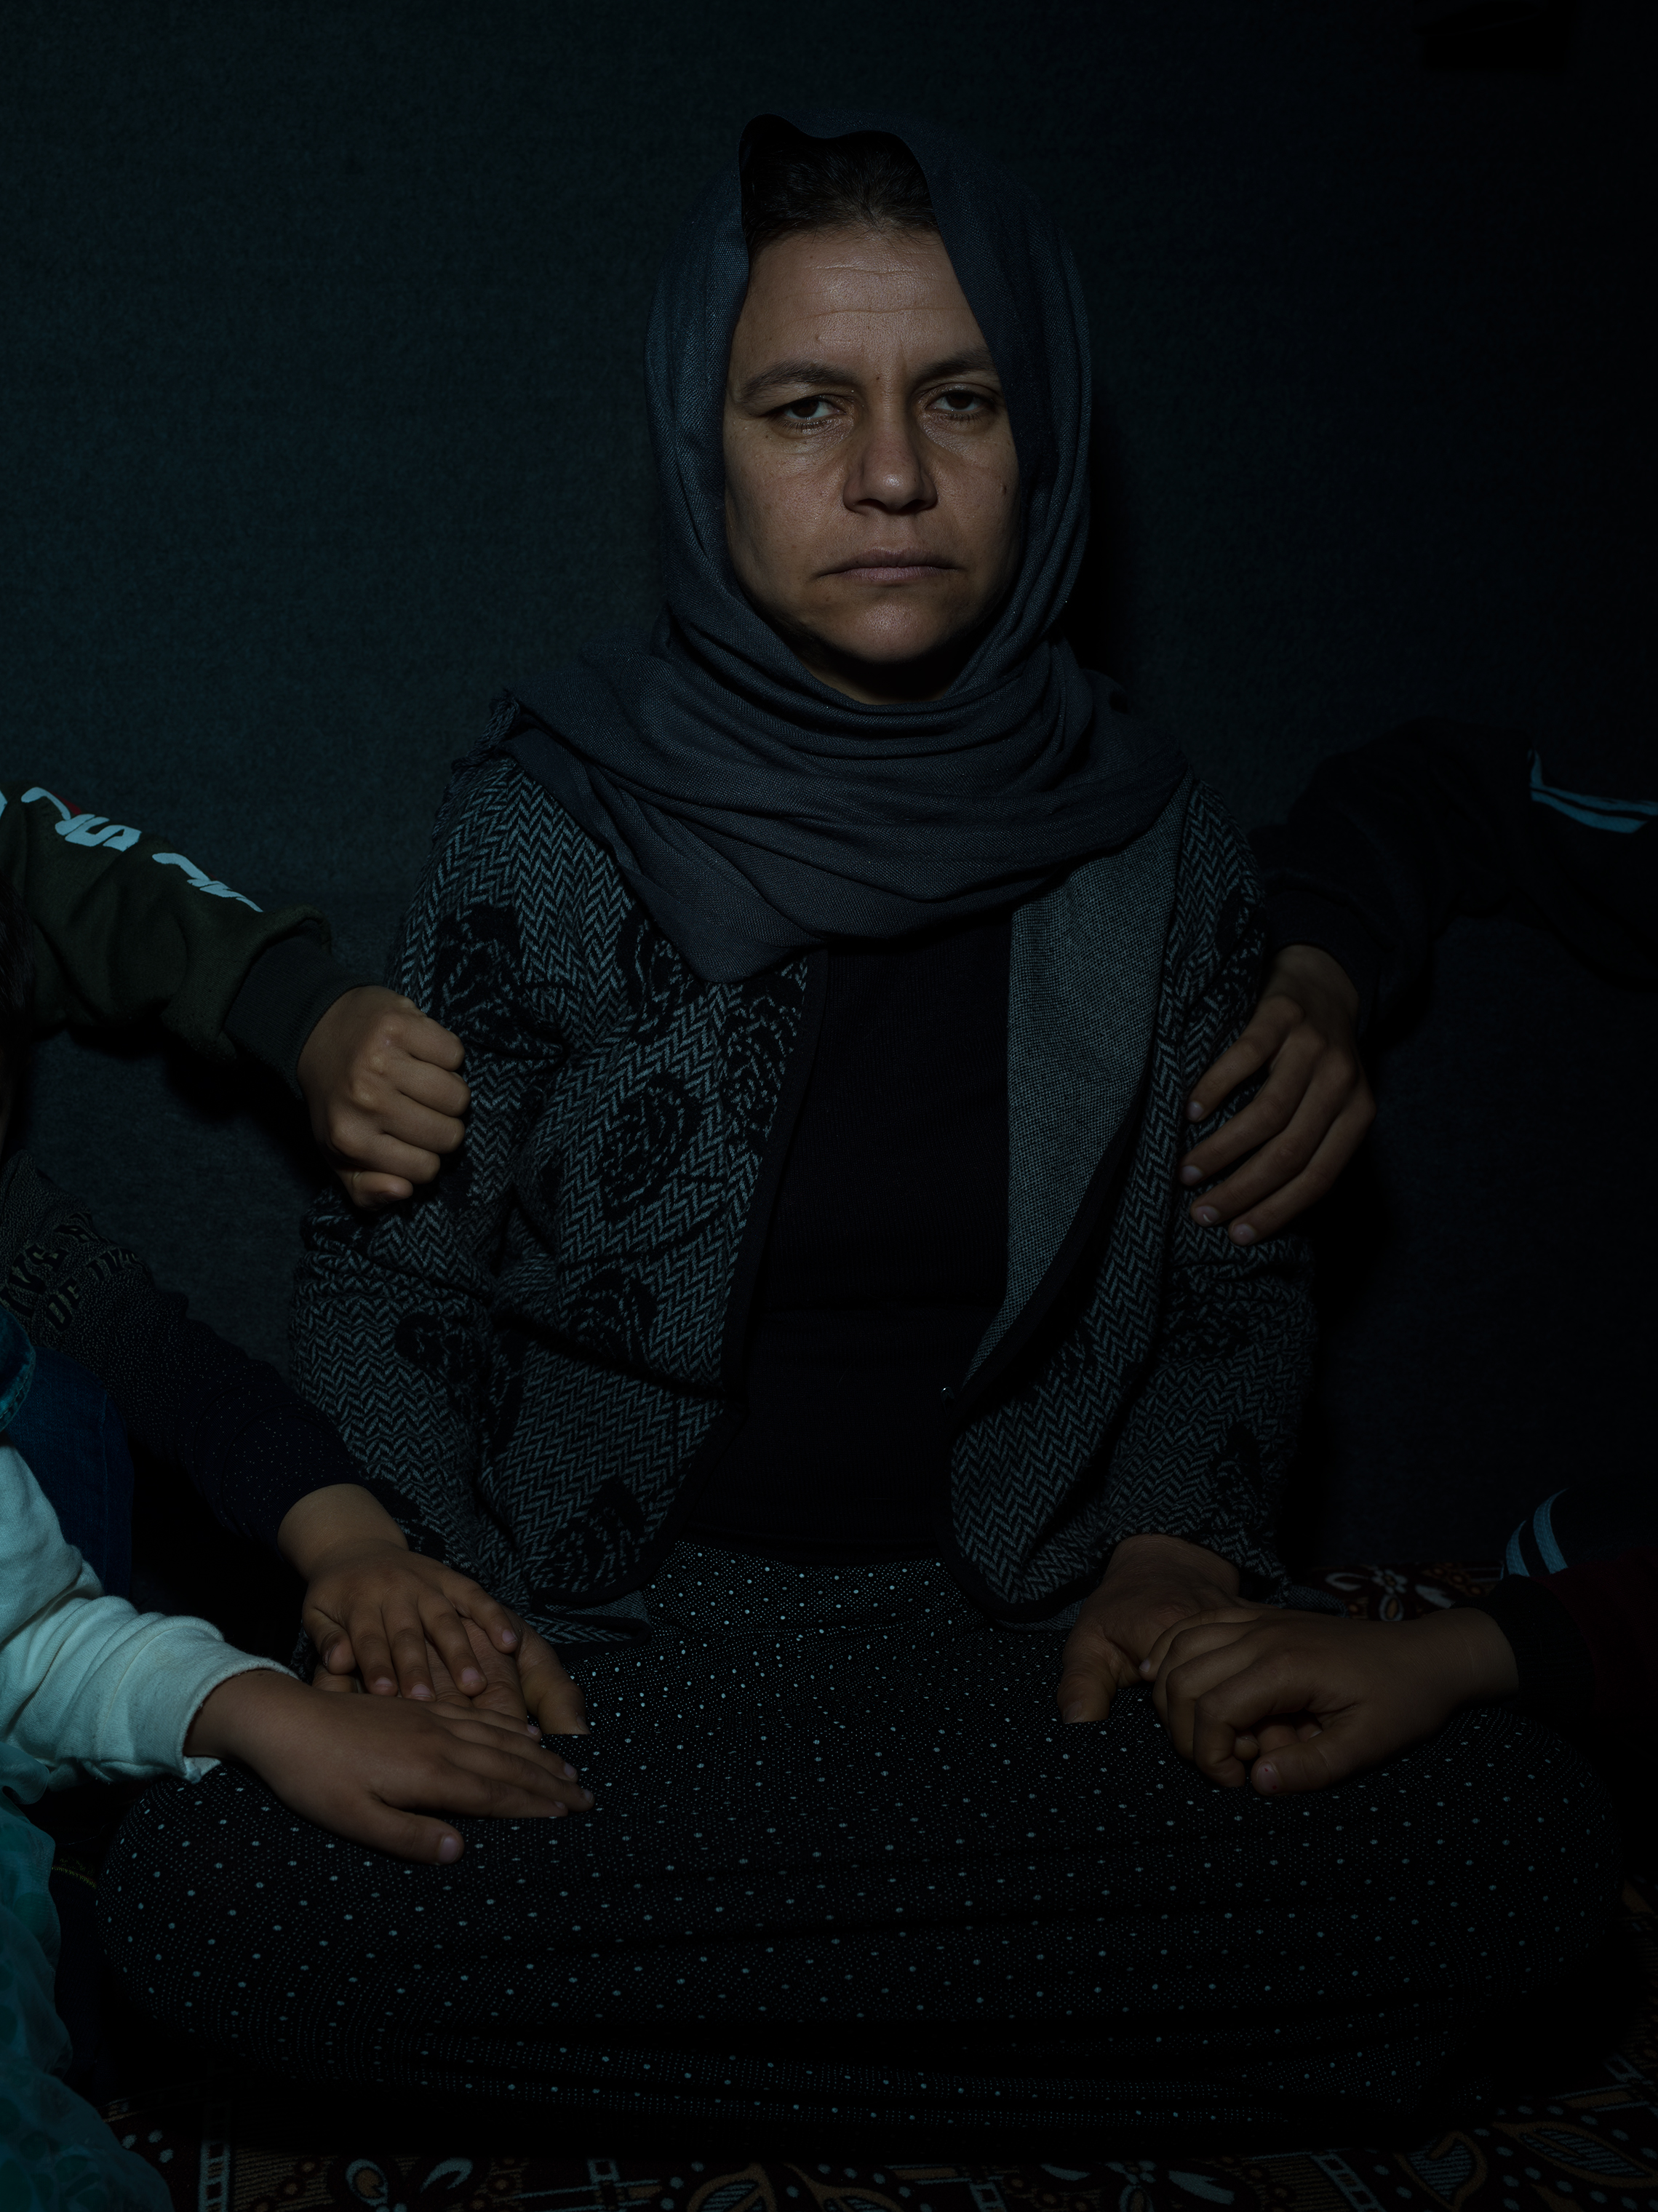 Subha, 35, and the hands of her children: Fahad, 15; Fahdi, 13; Linda, 10; Liza, 7; and Salam, 5. Photographed in February, they were captured by ISIS in 2014 and held as slaves until recently escaping the battle in Baghouz. Fahad, who had been trained as a fighter, led the way to safety. (Newsha Tavakolian—Magnum Photos for TIME)